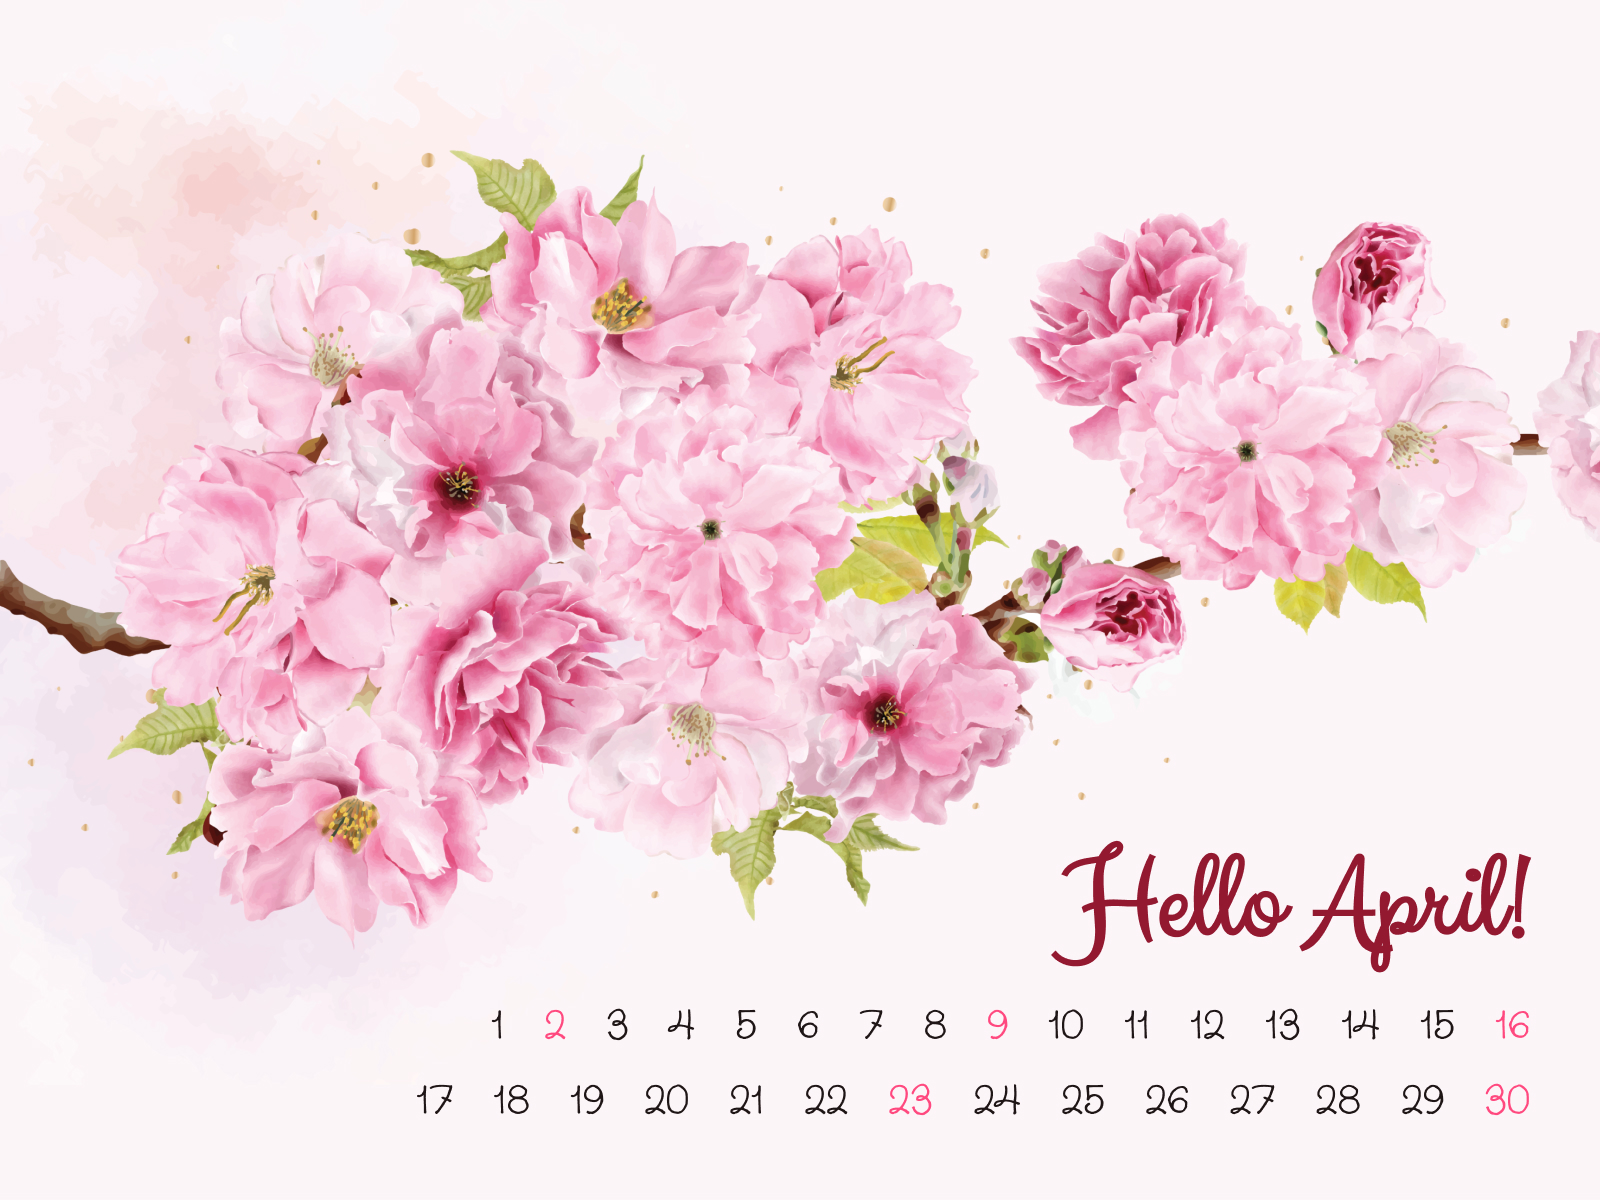 Calendar with a bunch of pink flowers on it.